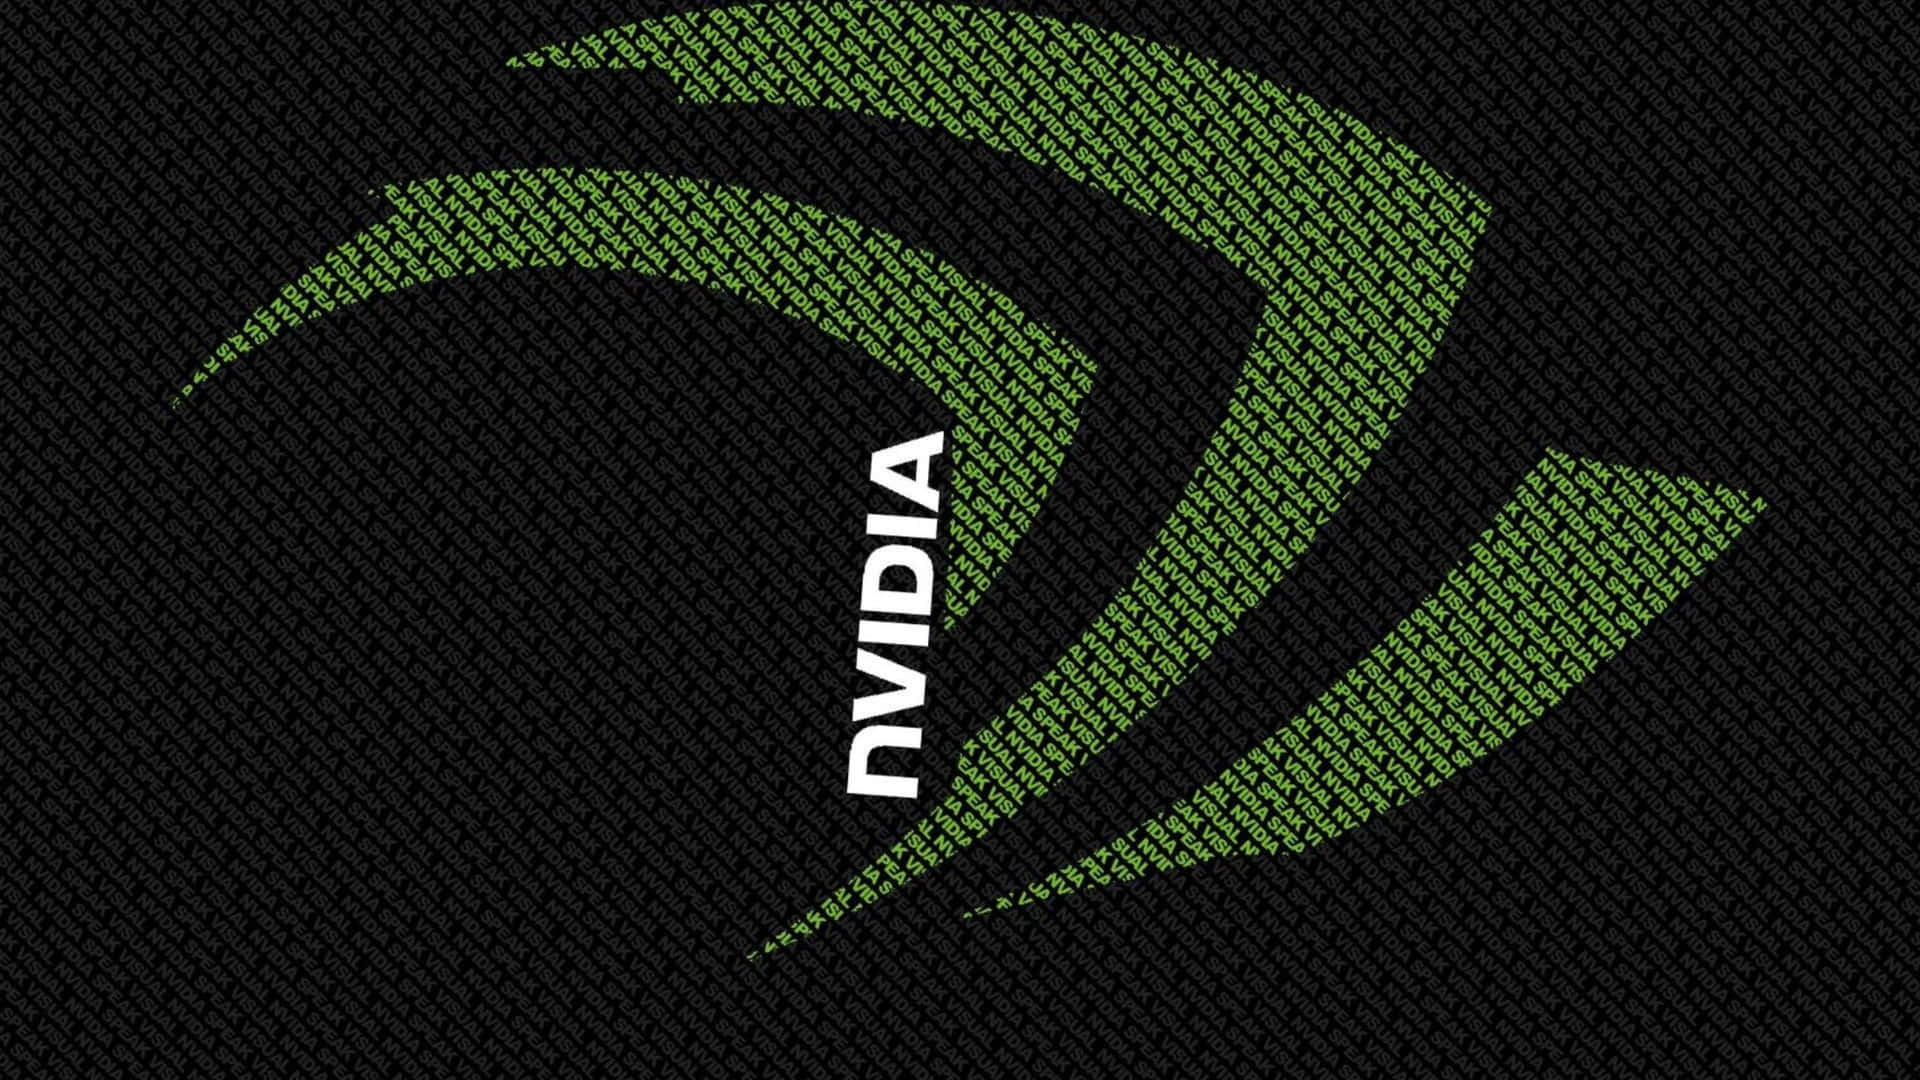 Get Ready for 4K HD with Nvidia Wallpaper